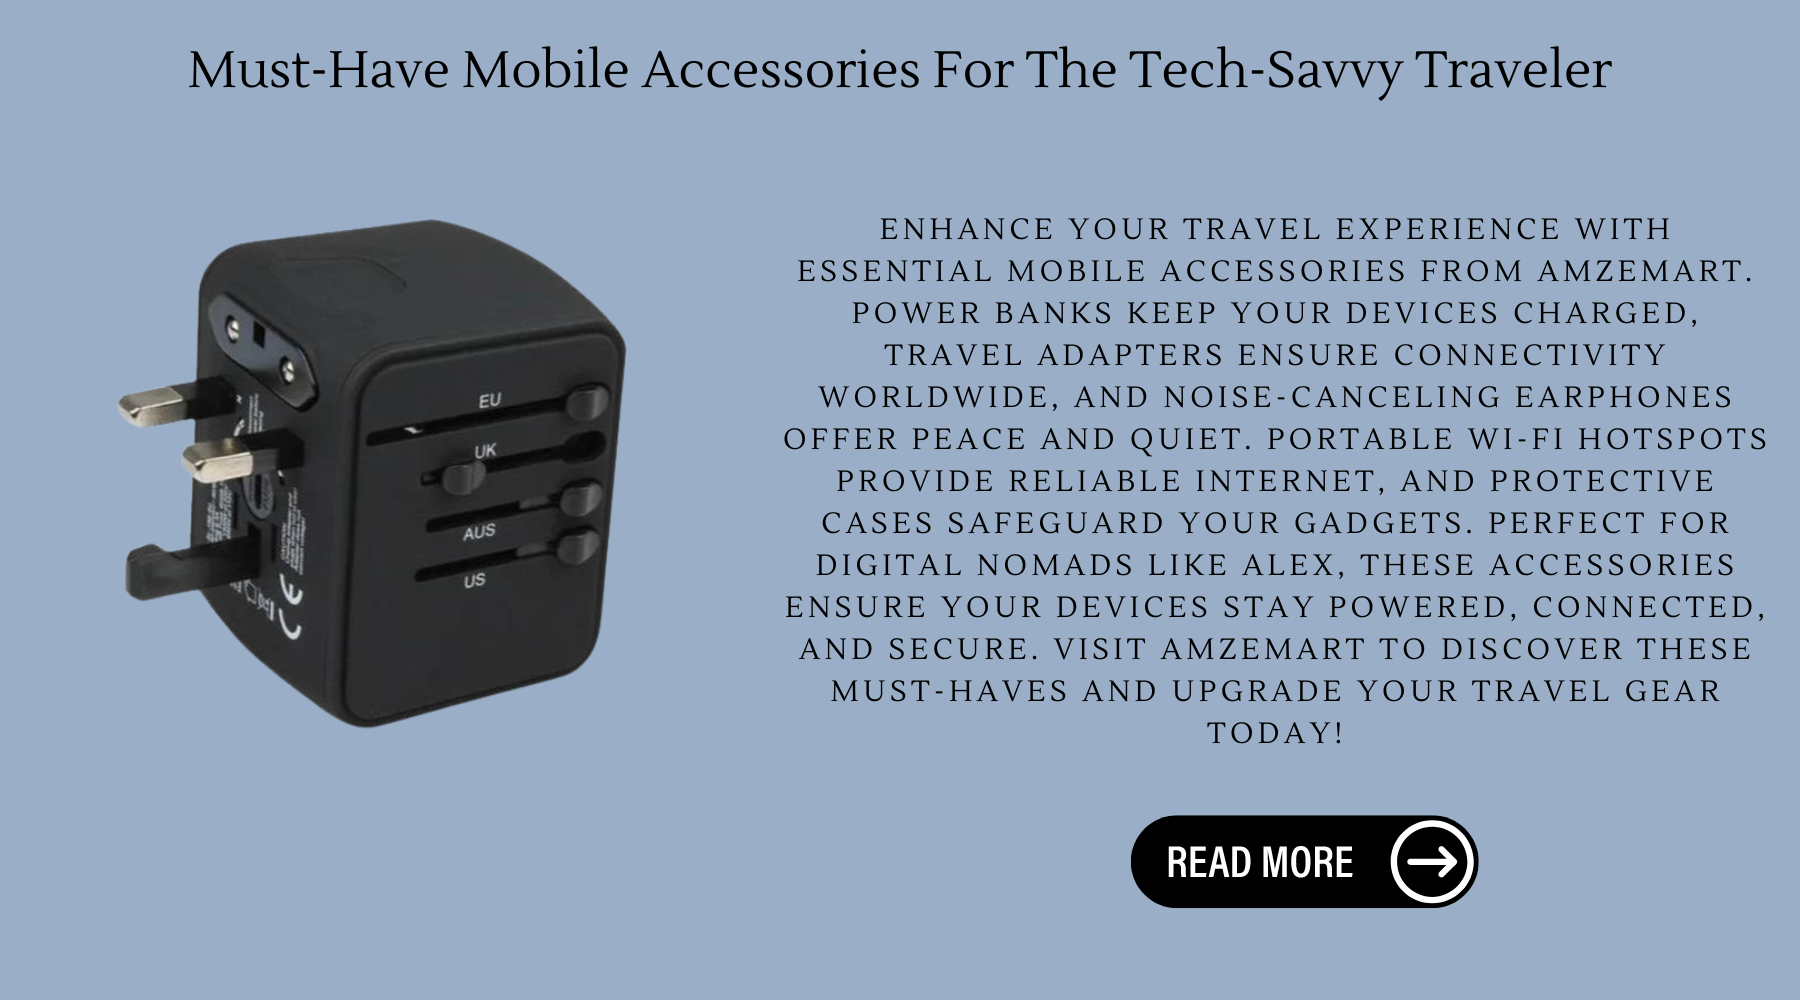 Must-Have Mobile Accessories For The Tech-Savvy Traveler